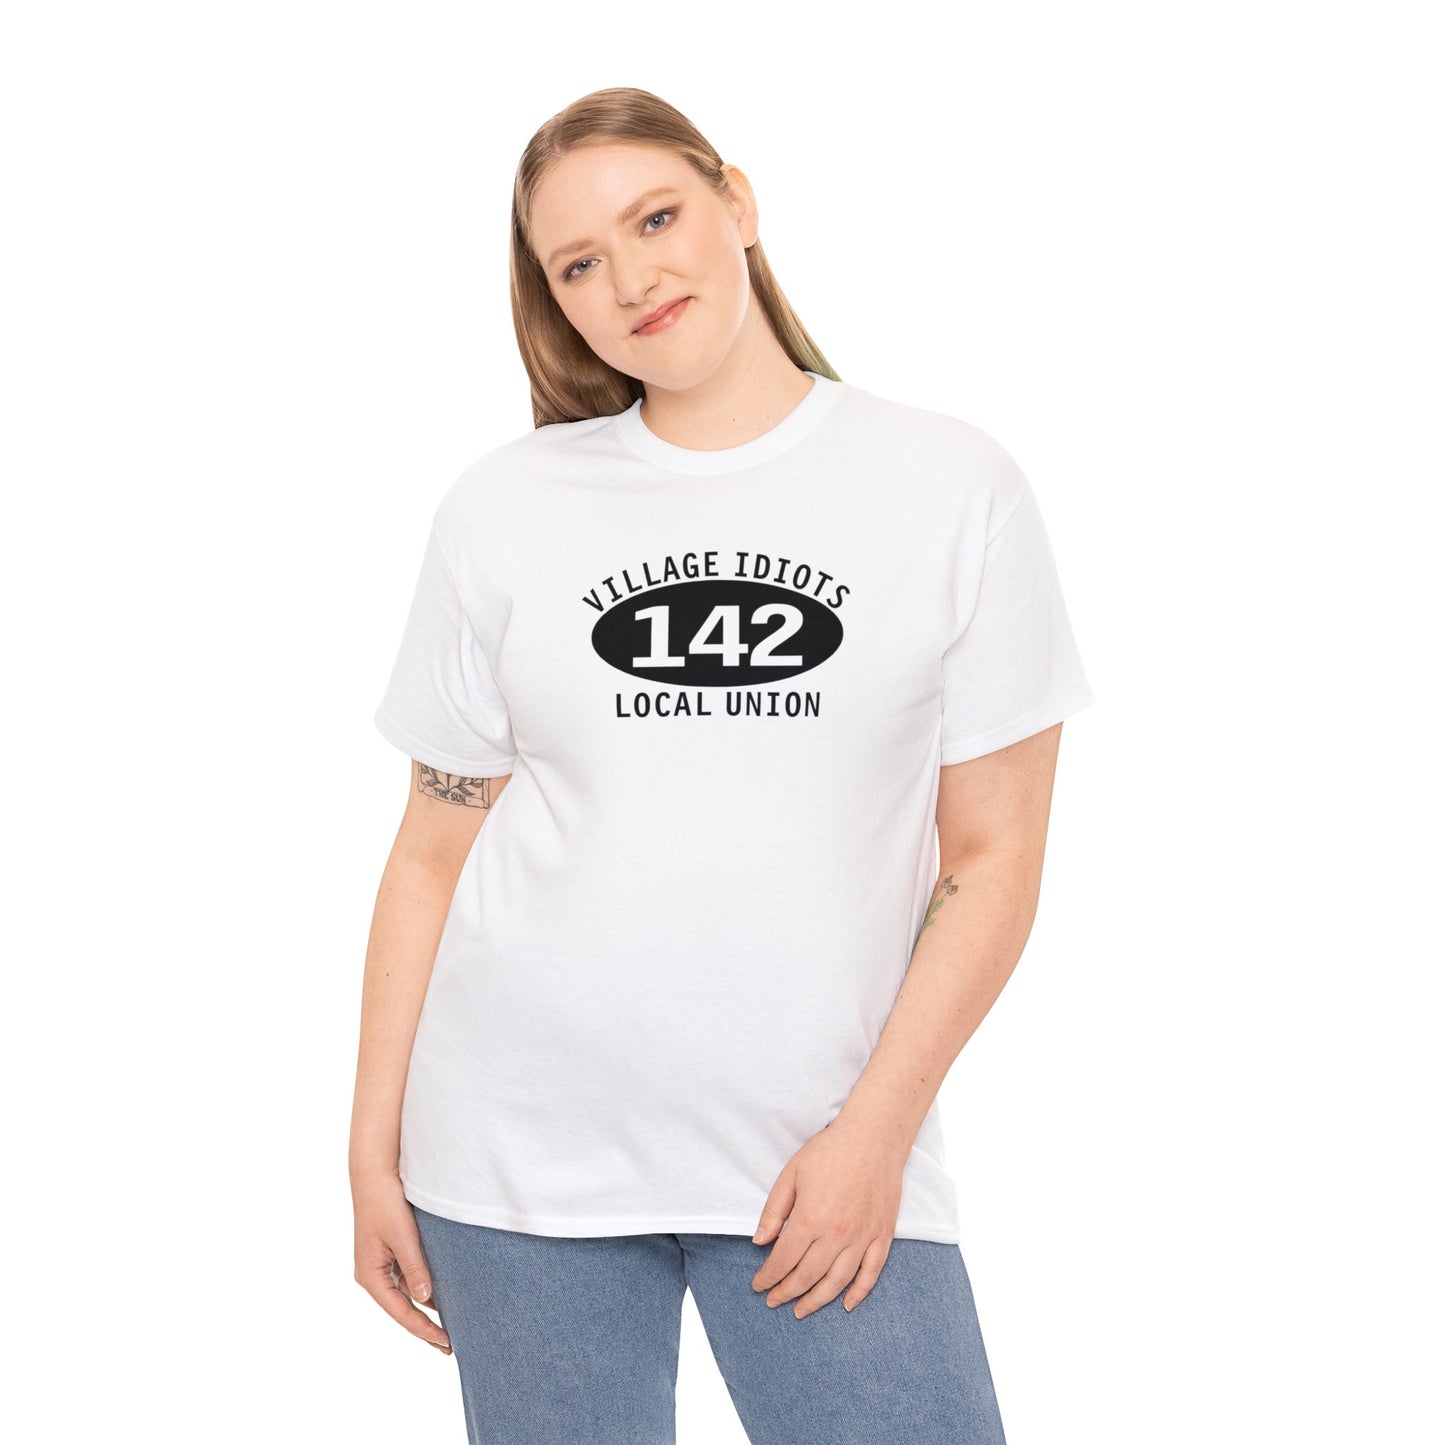 Village Idiots Local Union 142, funny Parody t-shirt, Funny Parody T-shirt Gift, Union Funny T-Shirt, Funny Gift for Dad